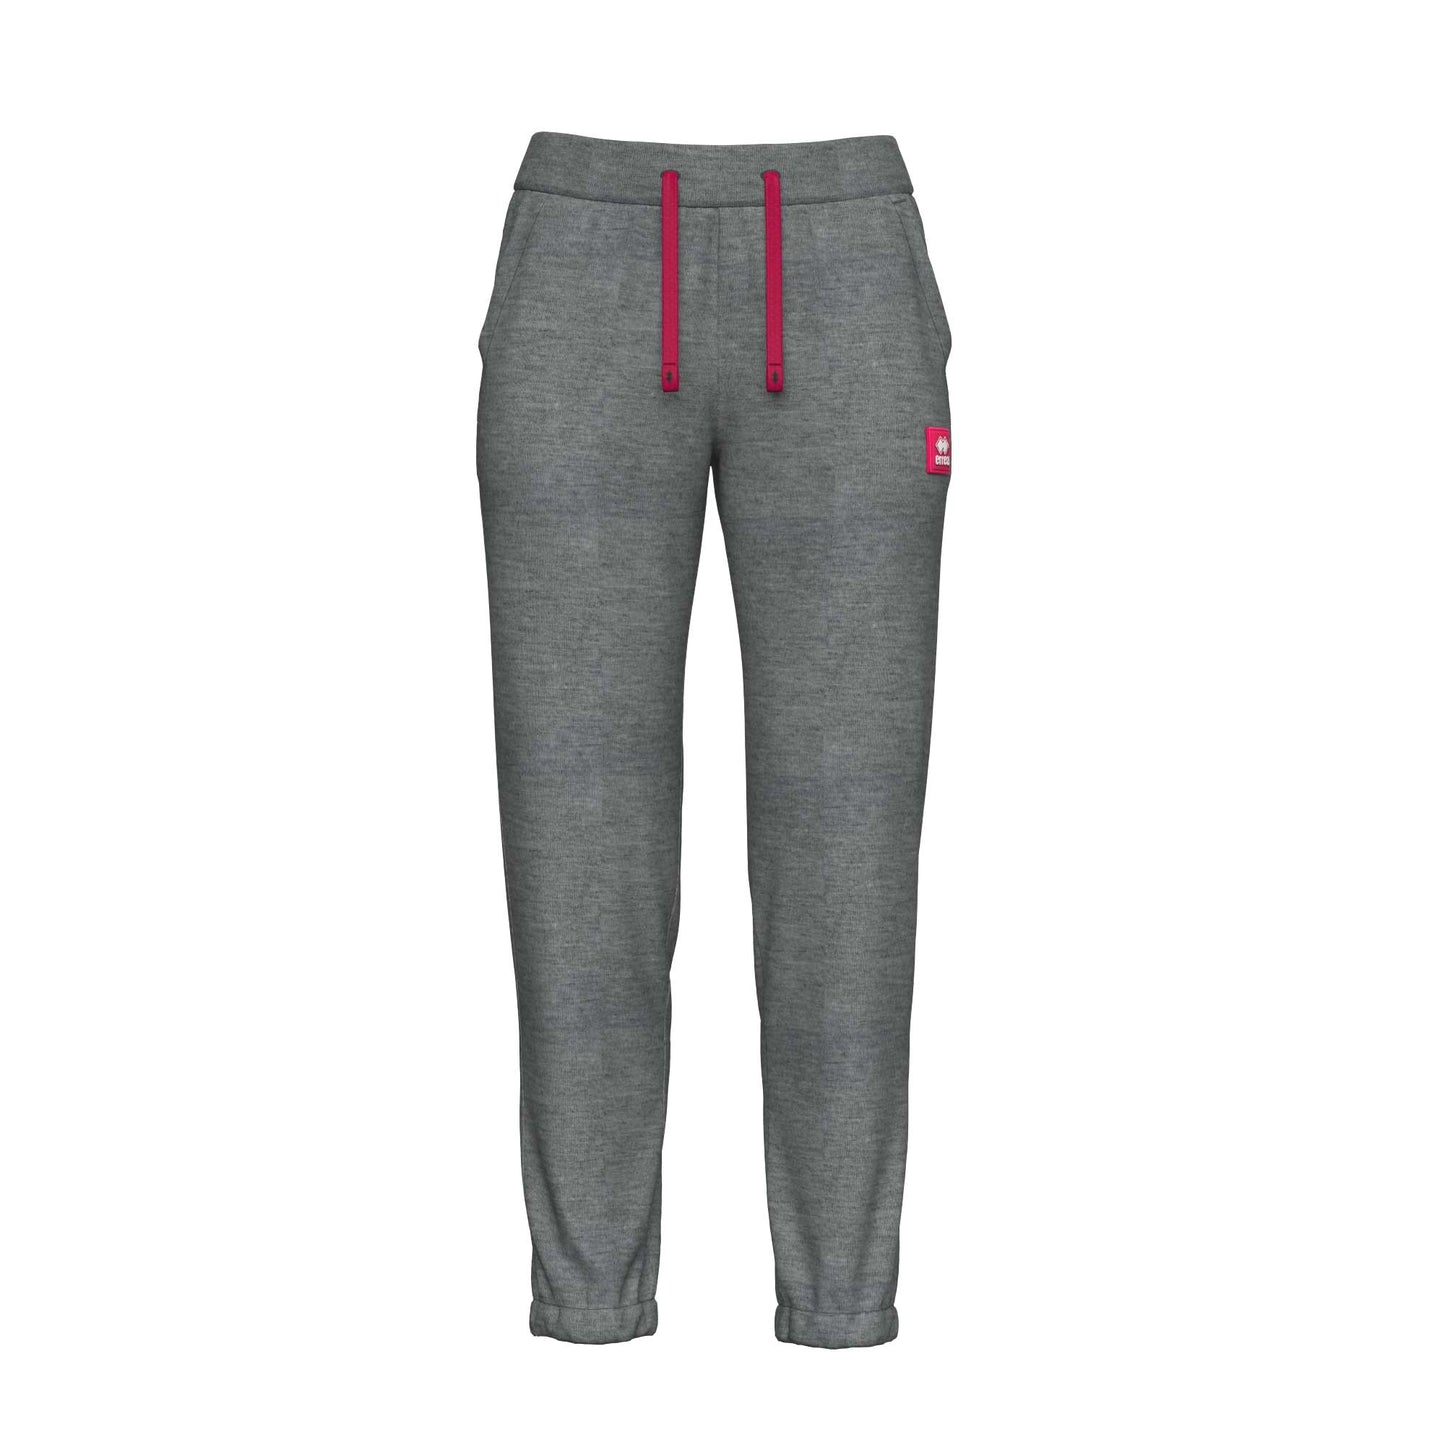 TECH PACK FW23/24 CUFFED PANT 04 WOMAN AD